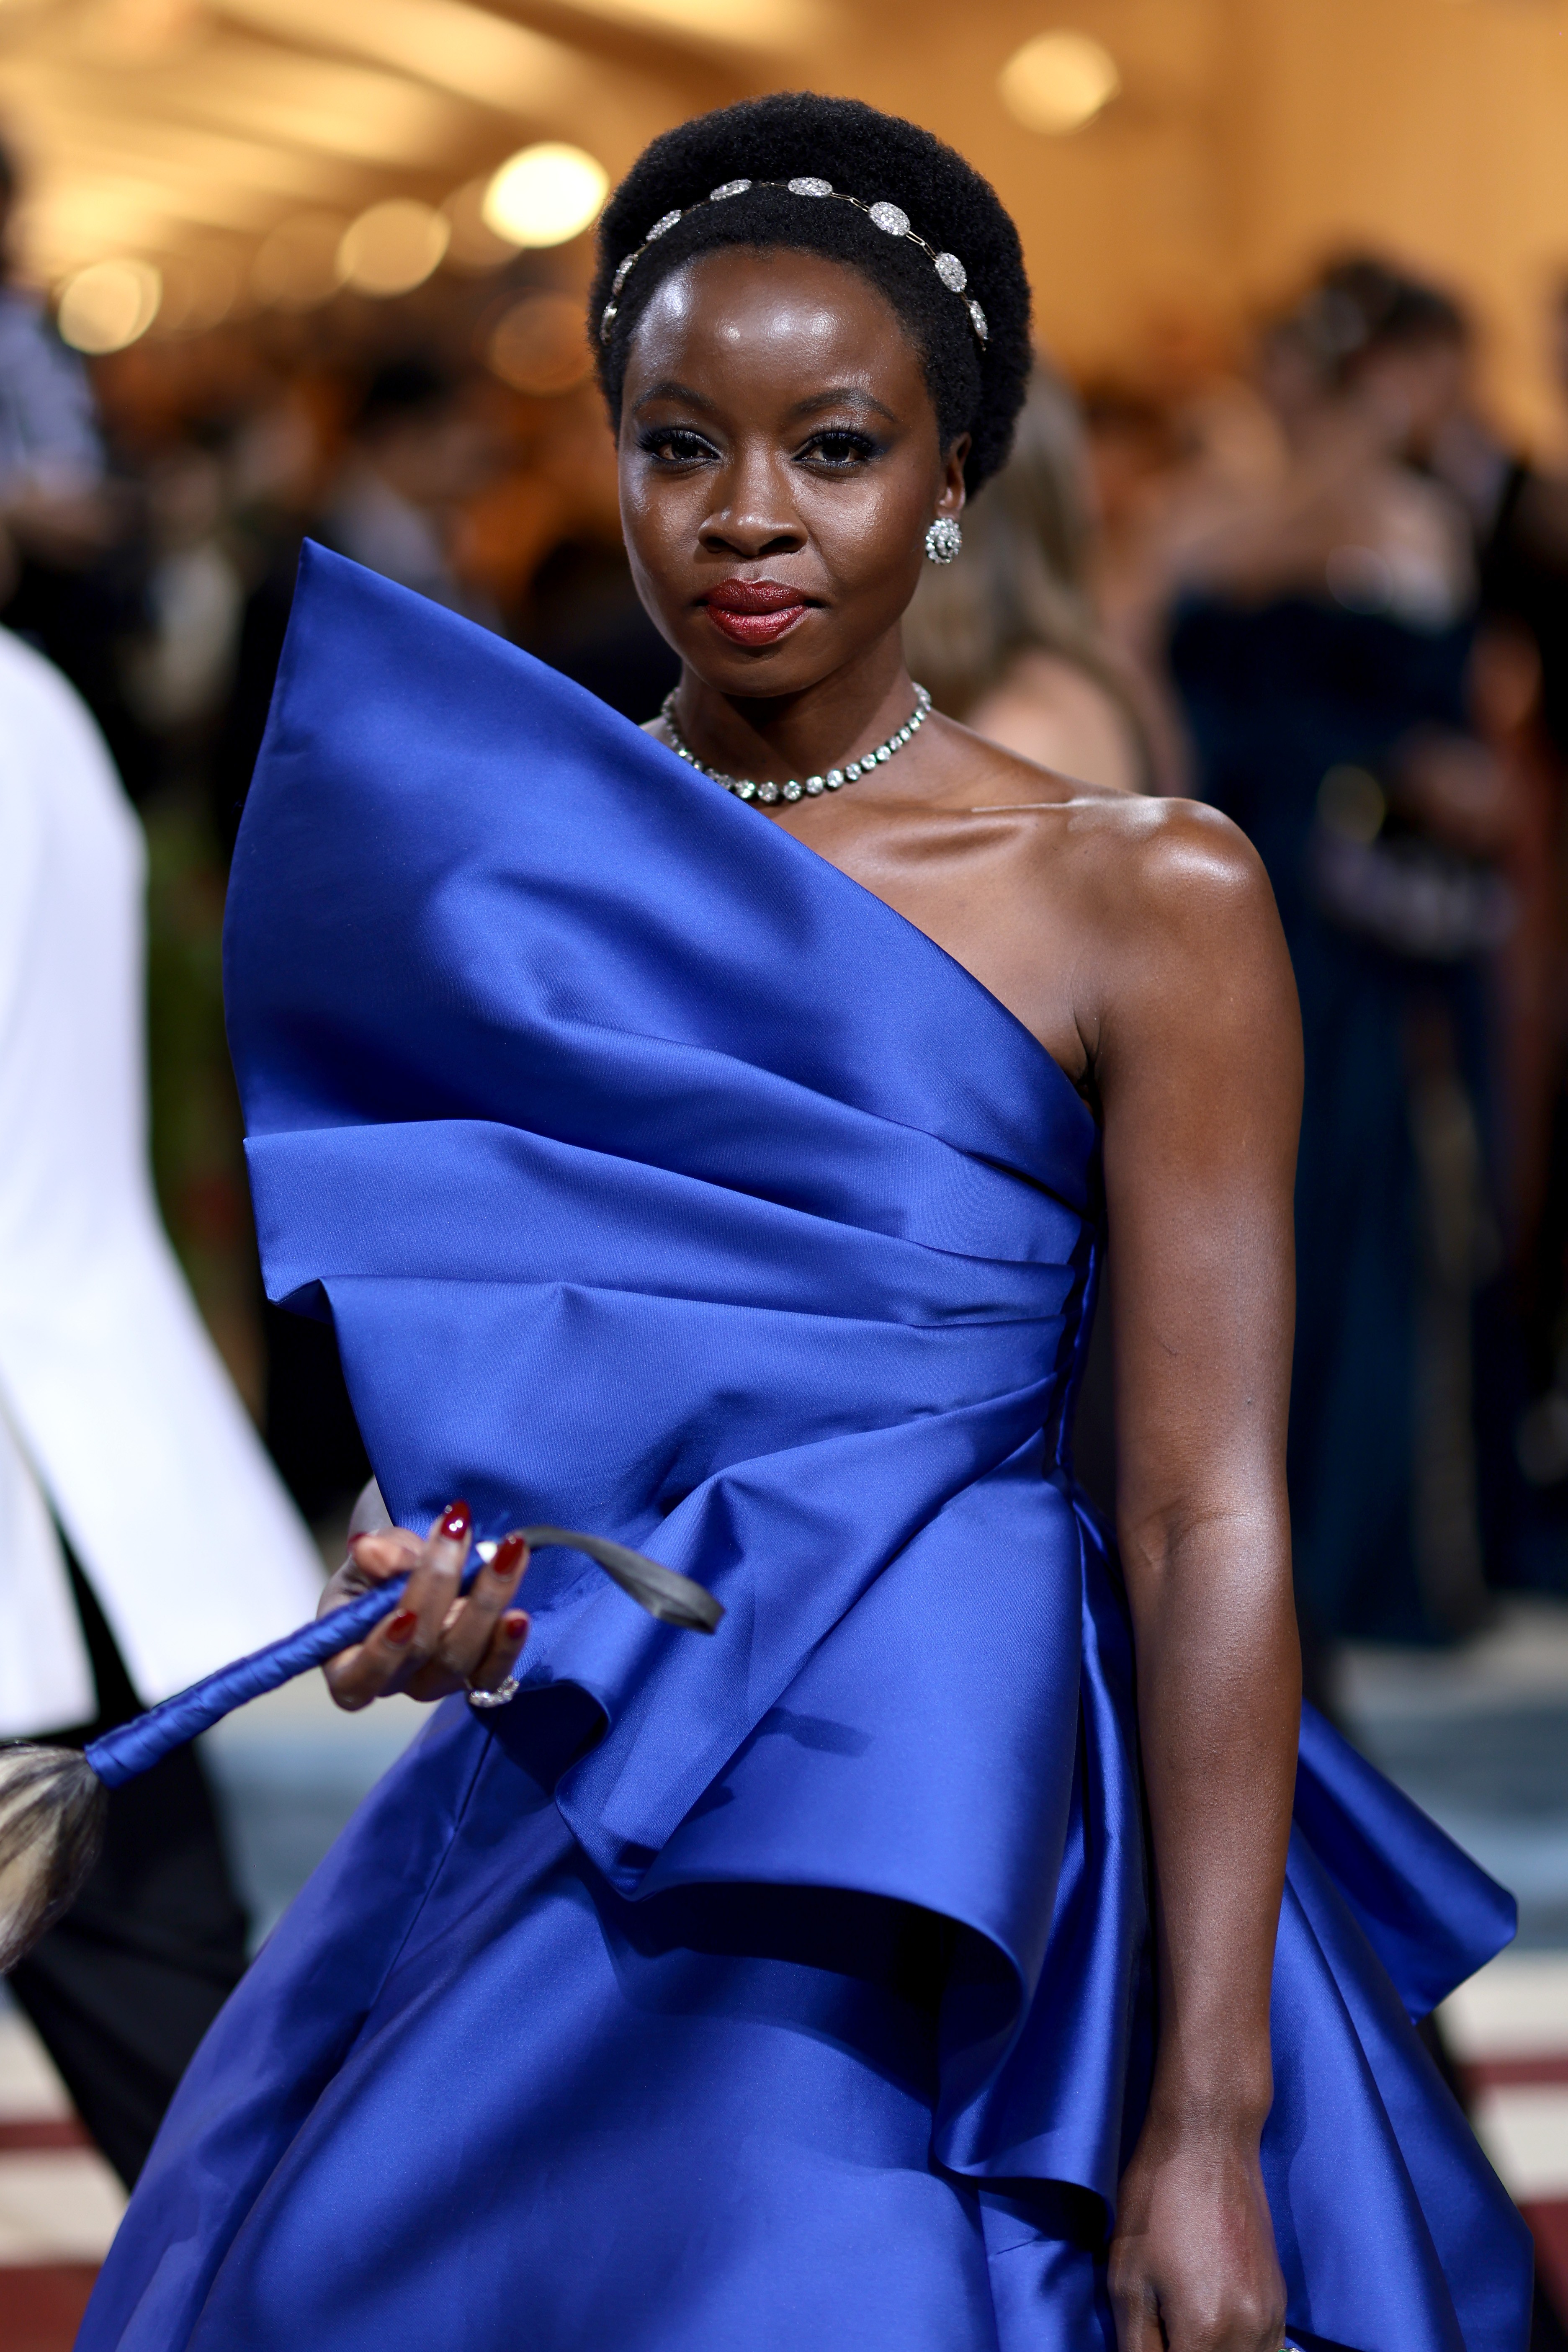 NEW YORK, NEW YORK - MAY 02: Danai Gurira attends The 2022 Met Gala Celebrating "In America: An Anthology of Fashion" at The Metropolitan Museum of Art on May 02, 2022 in New York City. (Photo by Dimitrios Kambouris/Getty Images for The Met Museum/Vogue) (Foto: Getty Images for The Met Museum/)